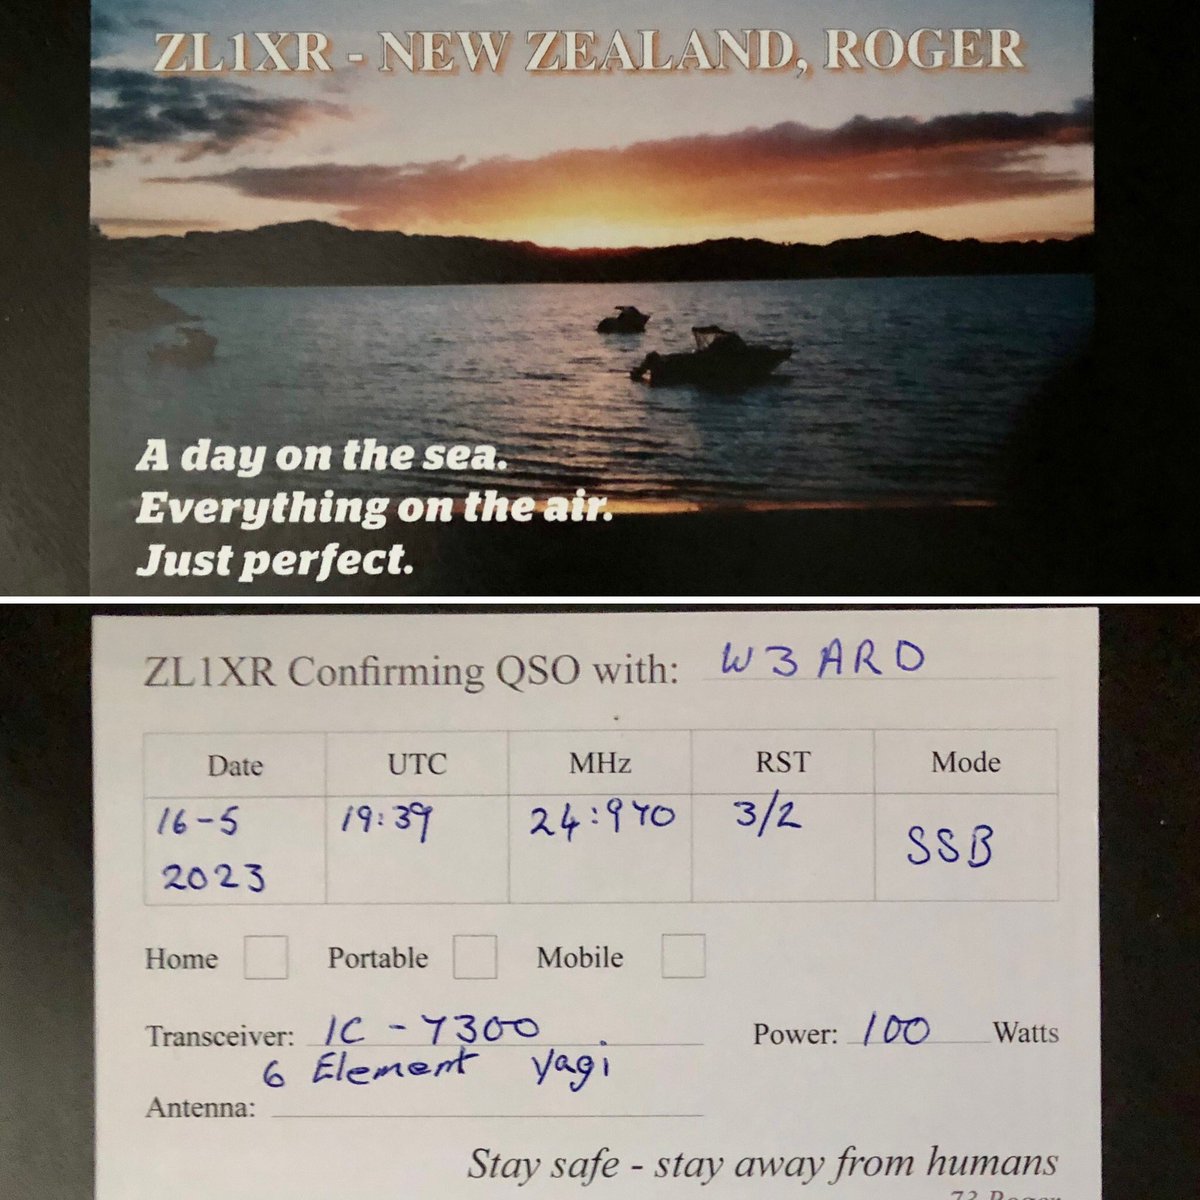 Really nice surprise in the mail today; QSL card from New Zealand for a contact about 3 weeks ago. I broke into a friendly QSO and gave a signal report hoping it would be received positively. Had a good laugh and mentioned it was my longest 100W DX to date and then this showed up